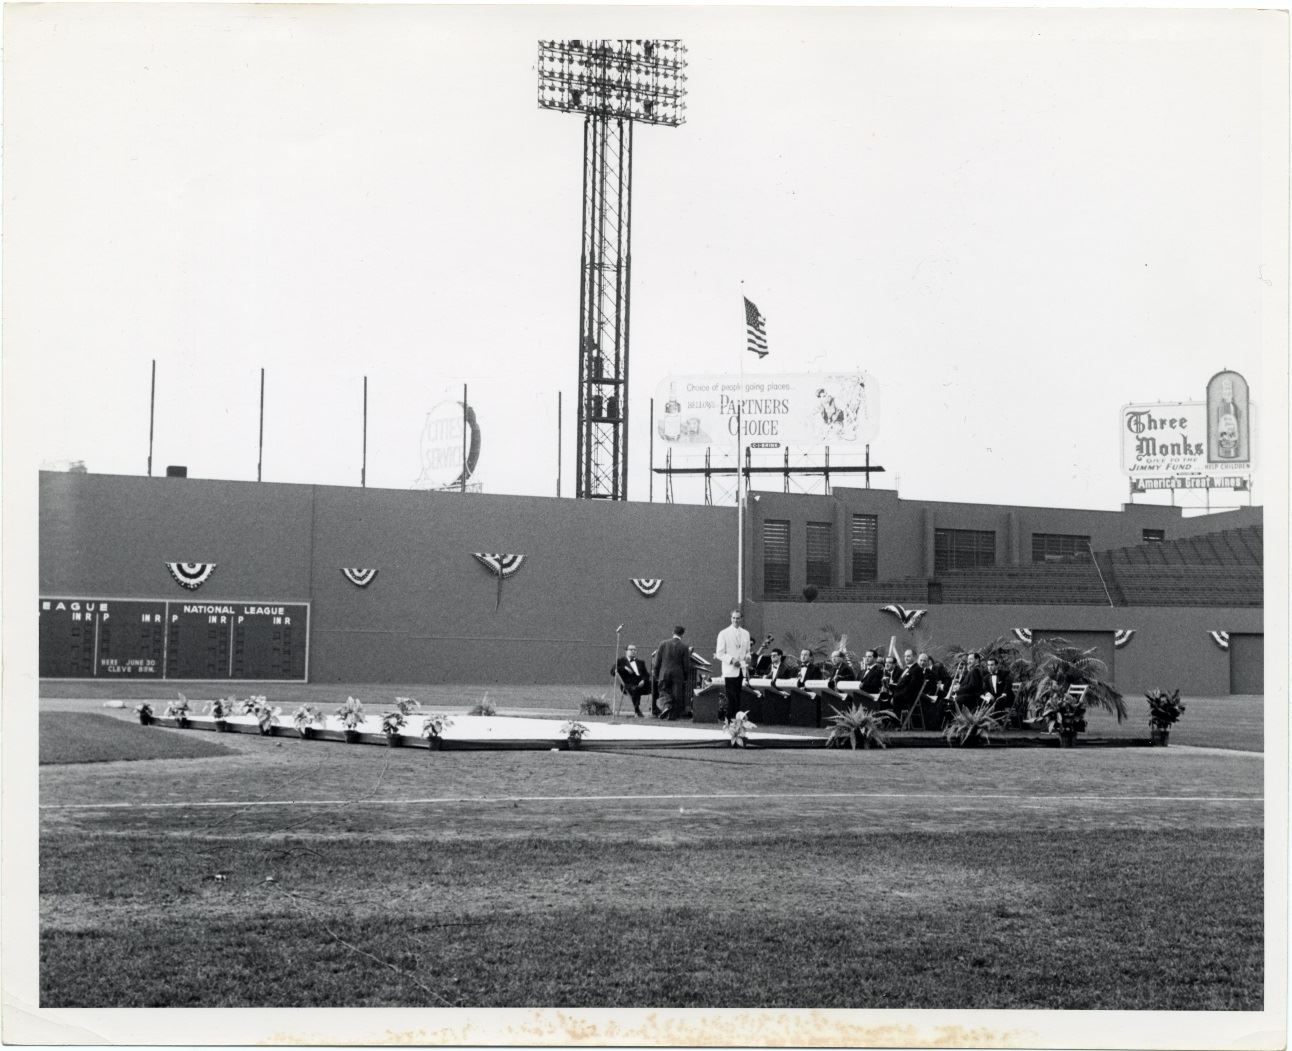 A black and white photo of a Fenway Park